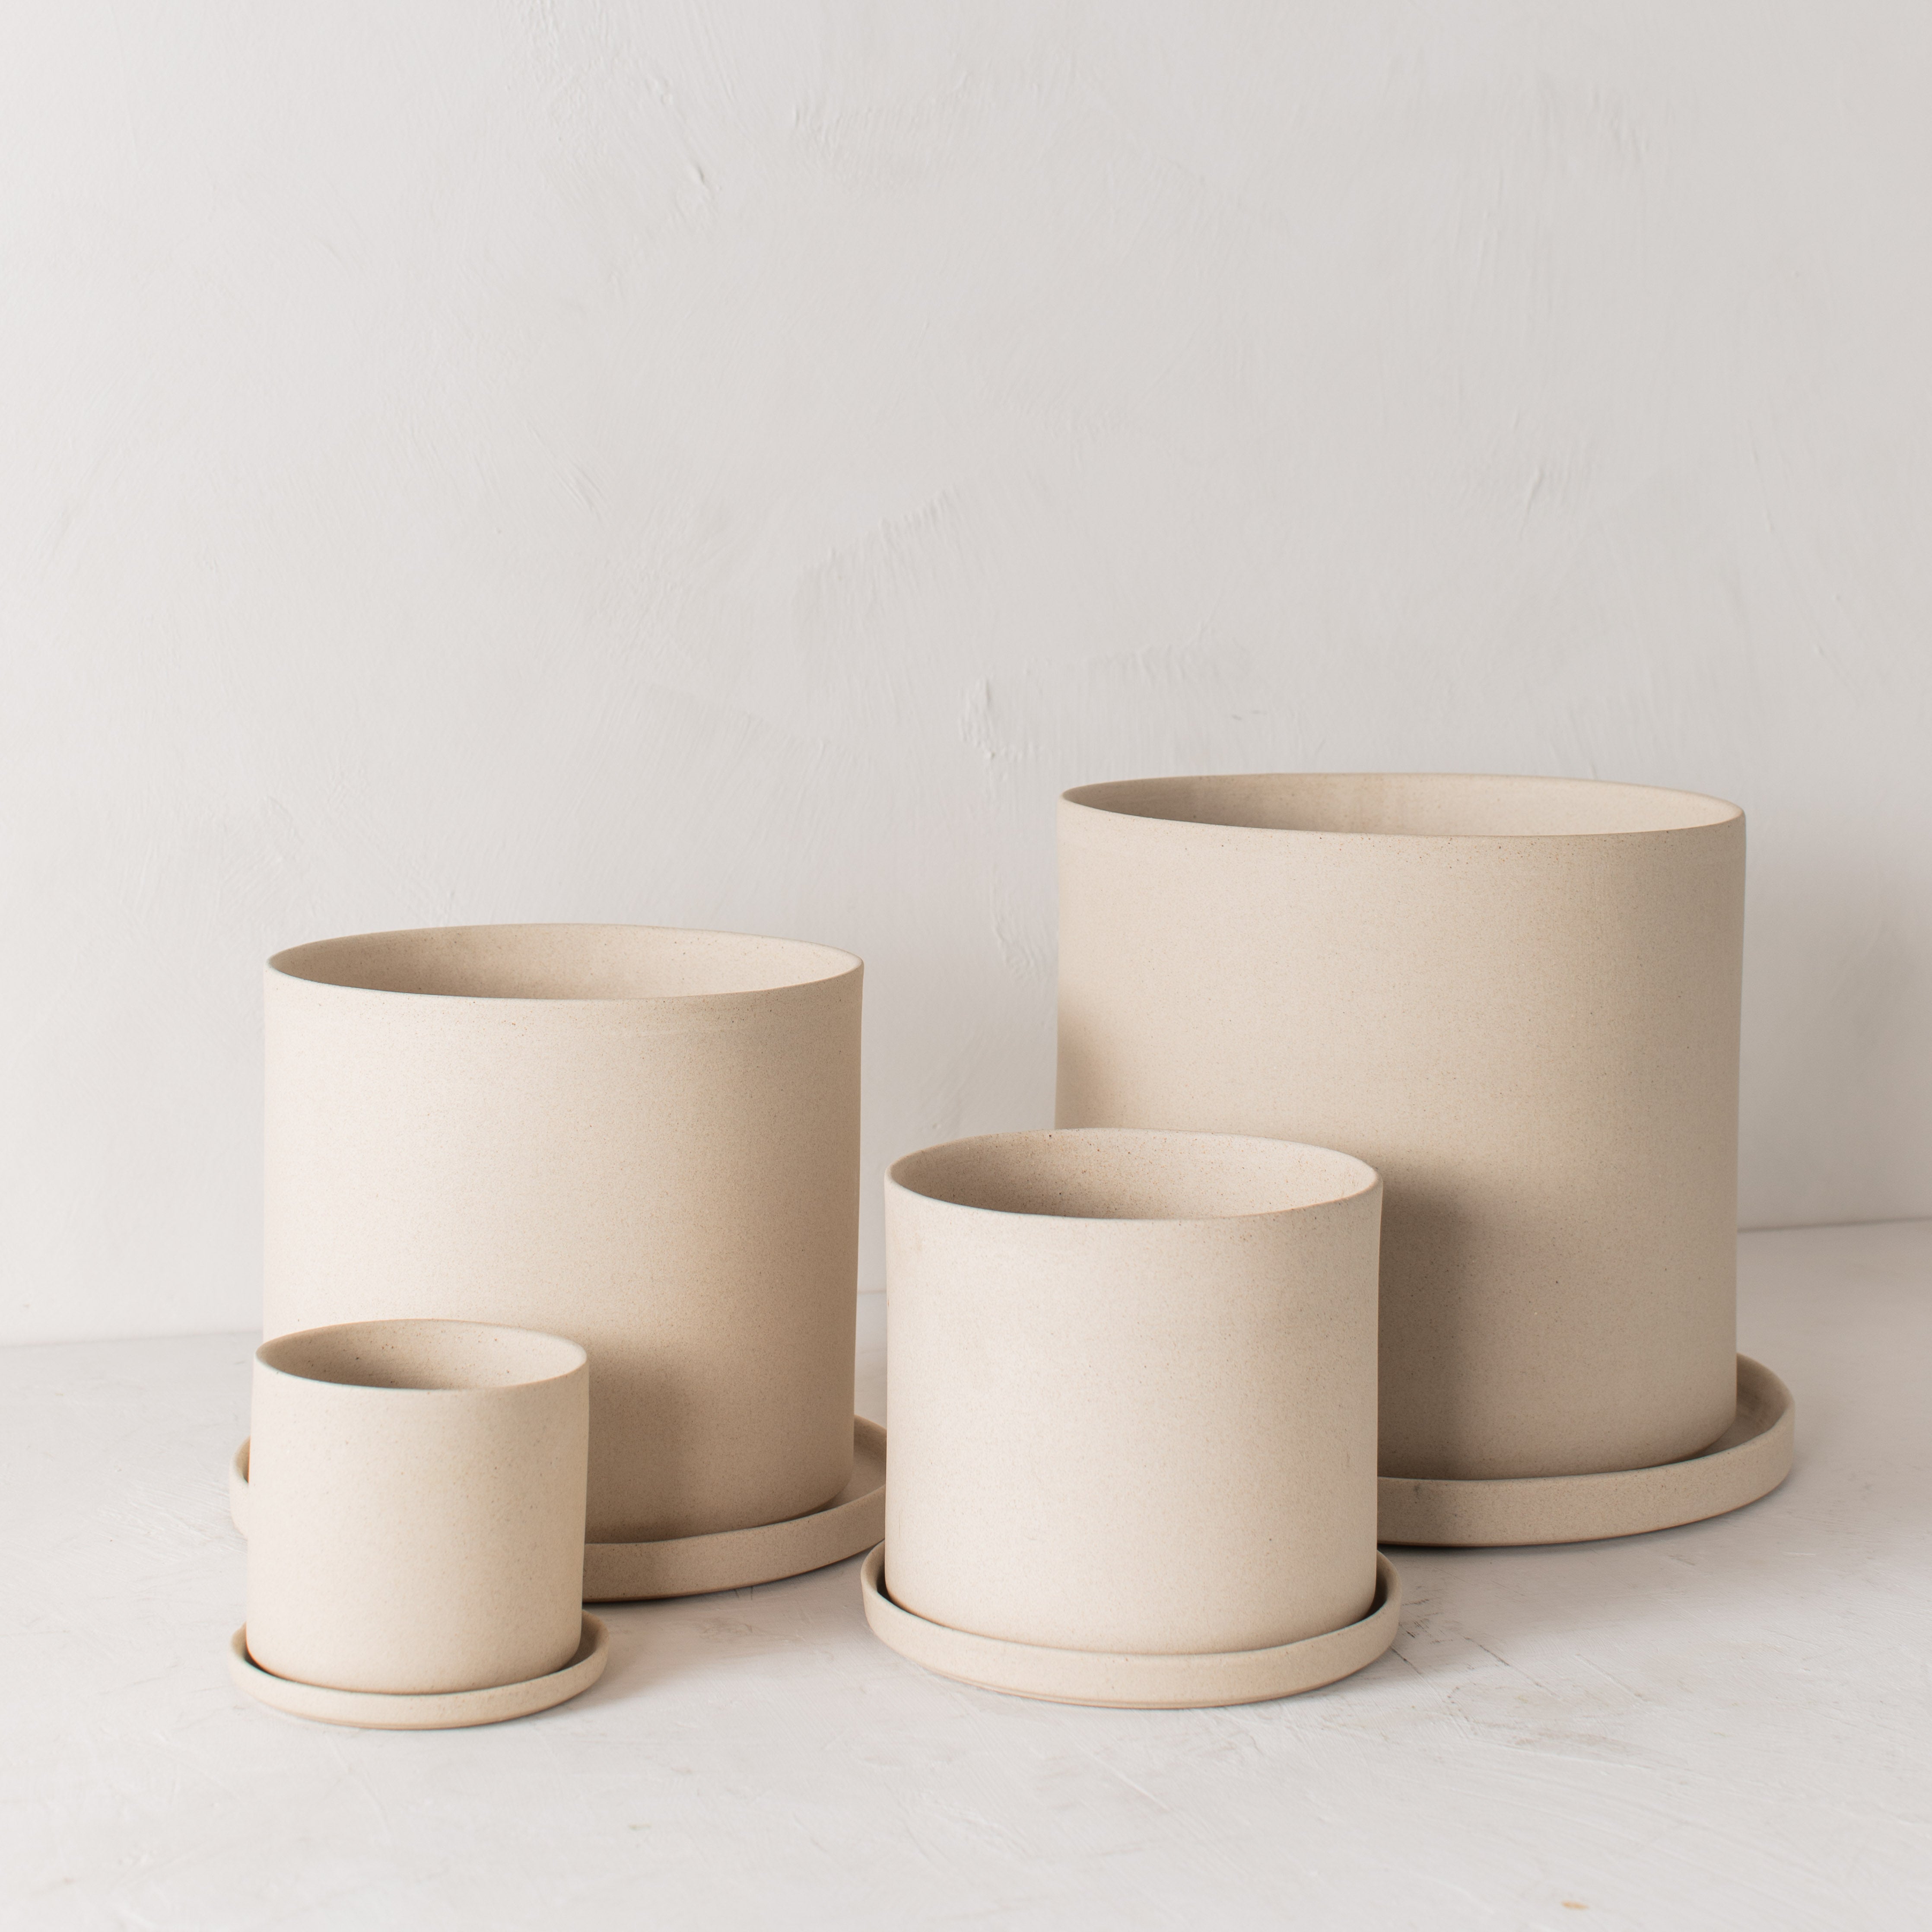 Four stoneware ceramic planters with bottom drainage dishes, 4, 6, 8, and 10 inches. Staged on a white plaster textured tabletop against a plaster textured white wall. Large ta. Designed and sold by Convivial Production, Kansas City Ceramics.